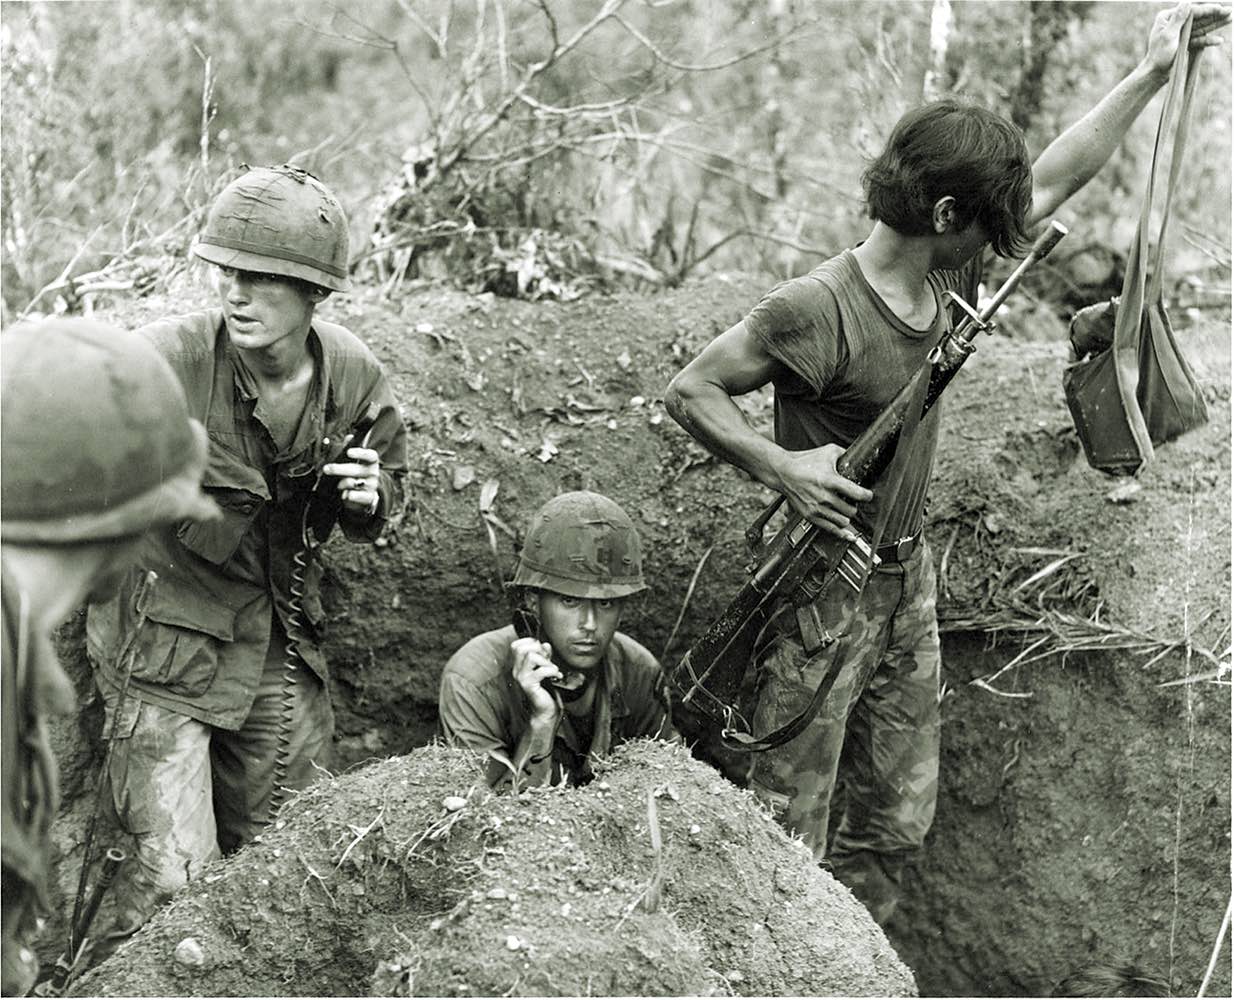 Delta Company Capt. Leland Roy calls in artillery fire and air support. With him are two of his soldiers and a Vietnamese guide. / Casemate Publishers